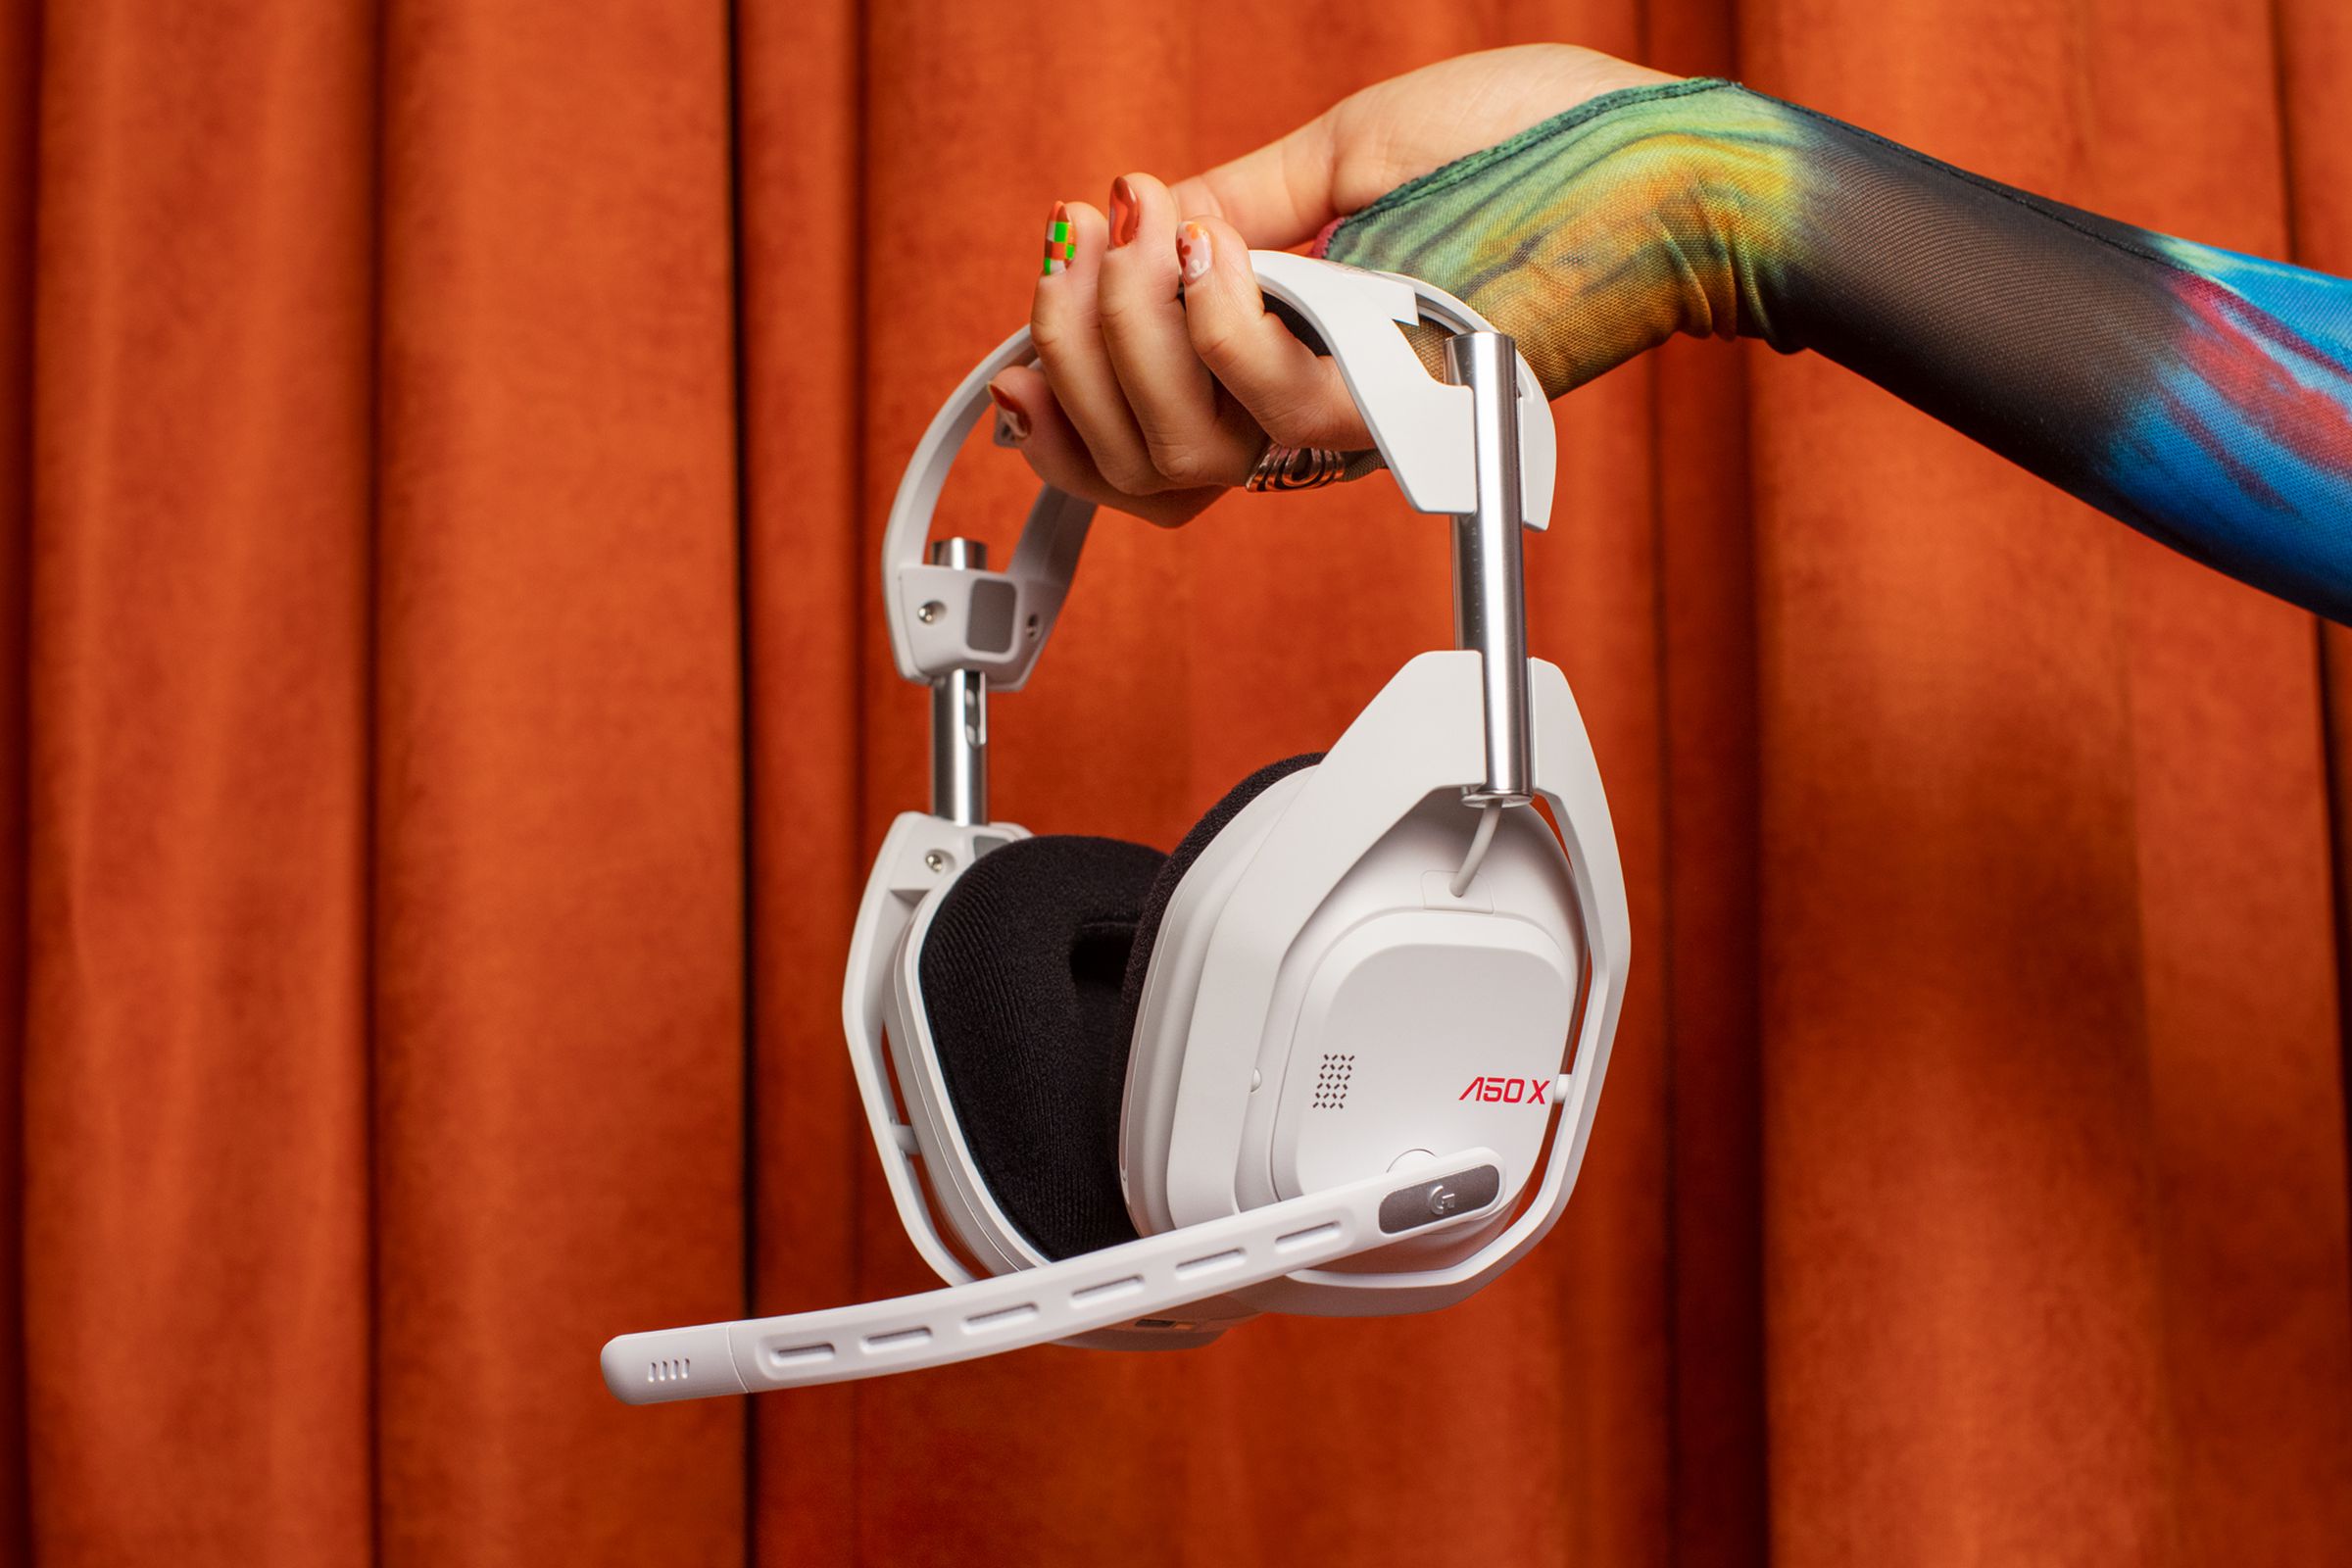 A person’s hand holding the white Astro A50 X gaming headset in front of a fabric backdrop.